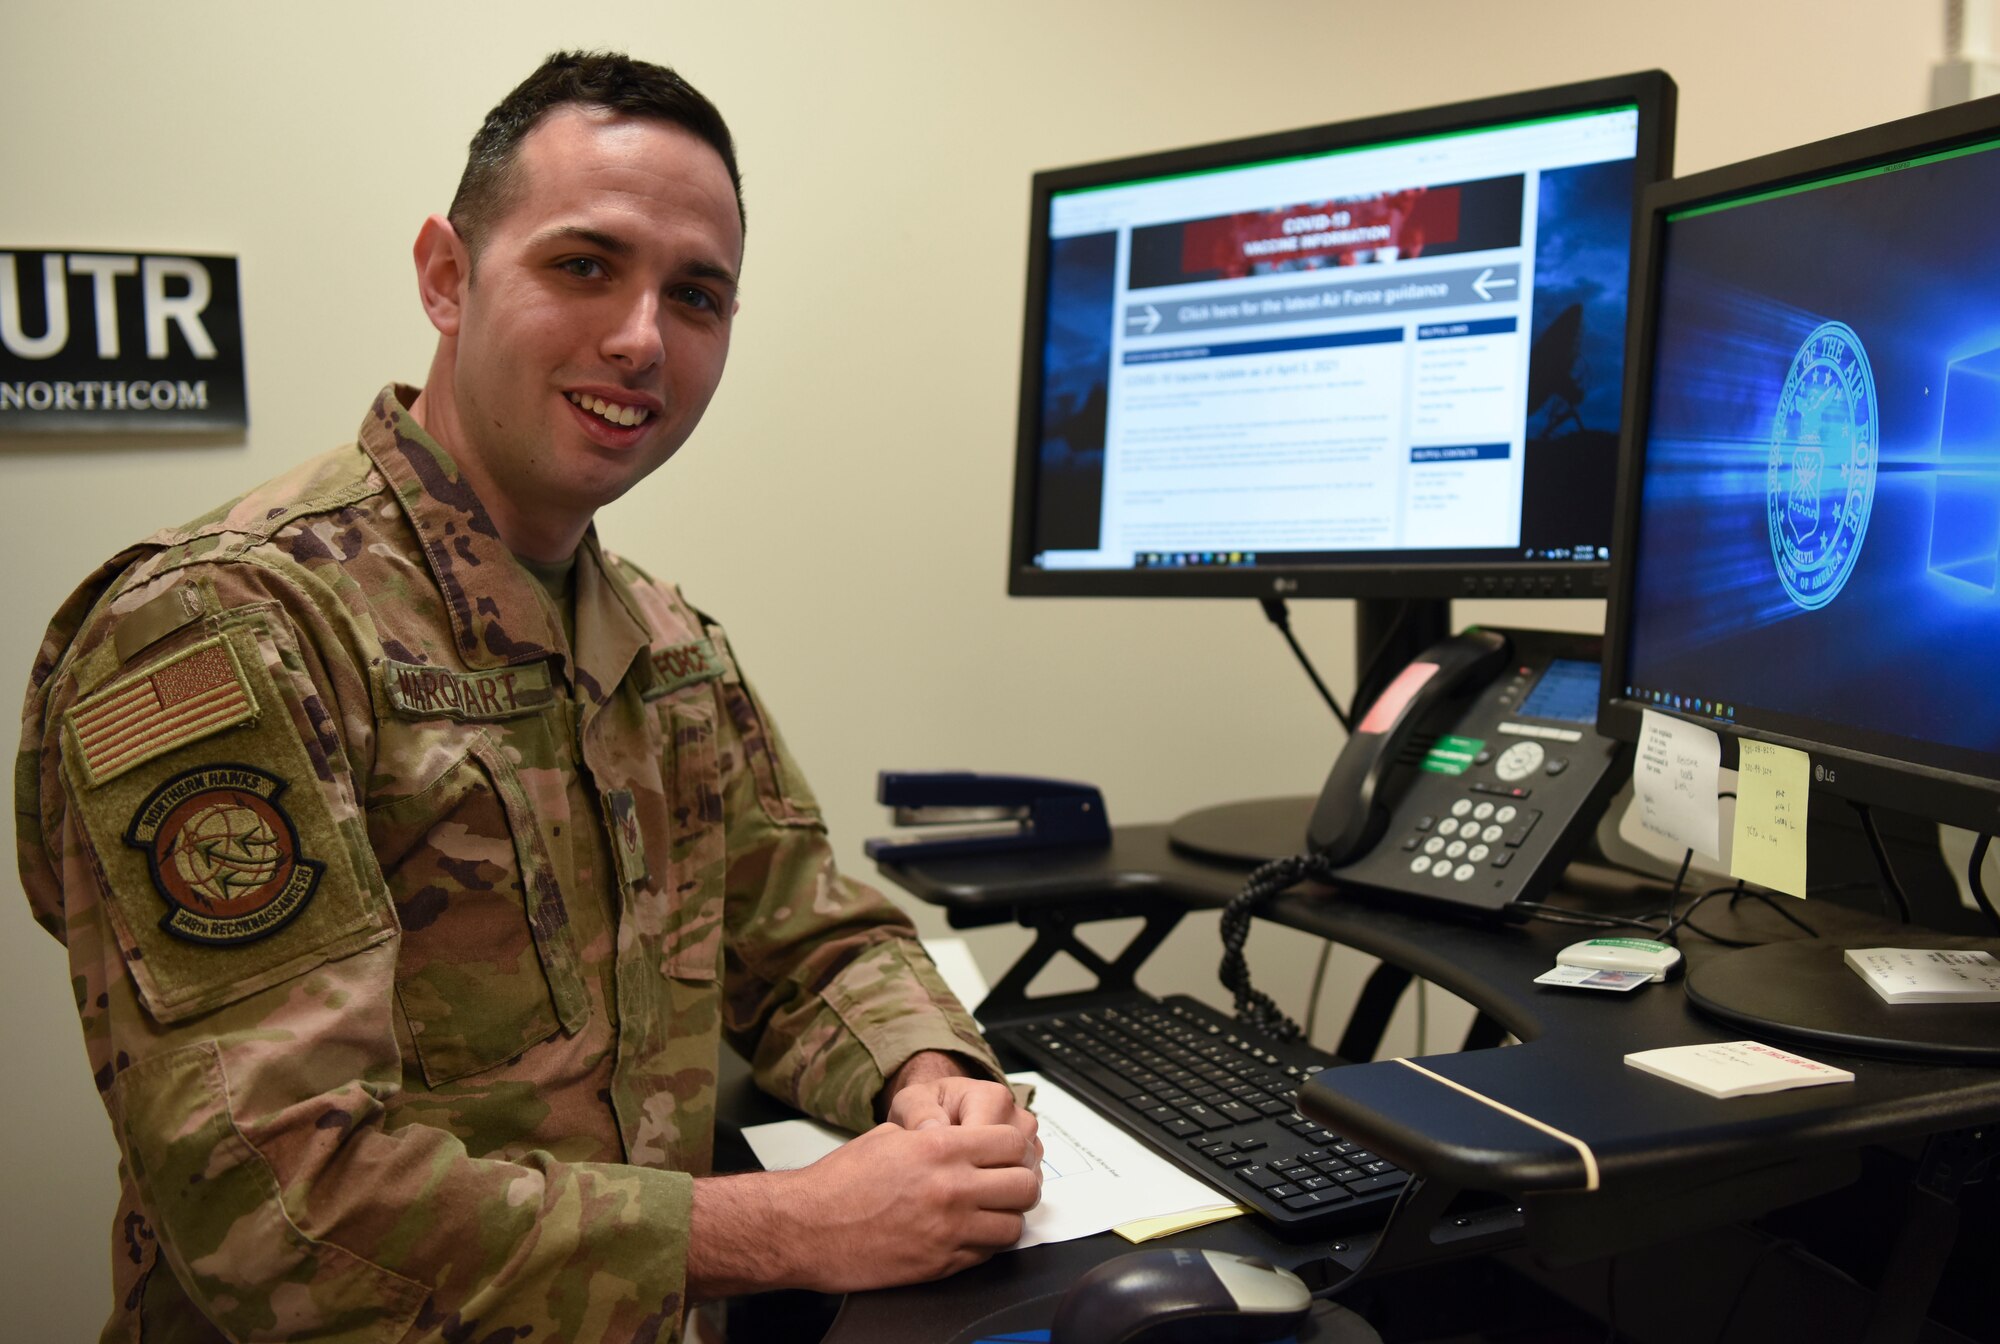 Airman stands next to computer and smiles at camera.